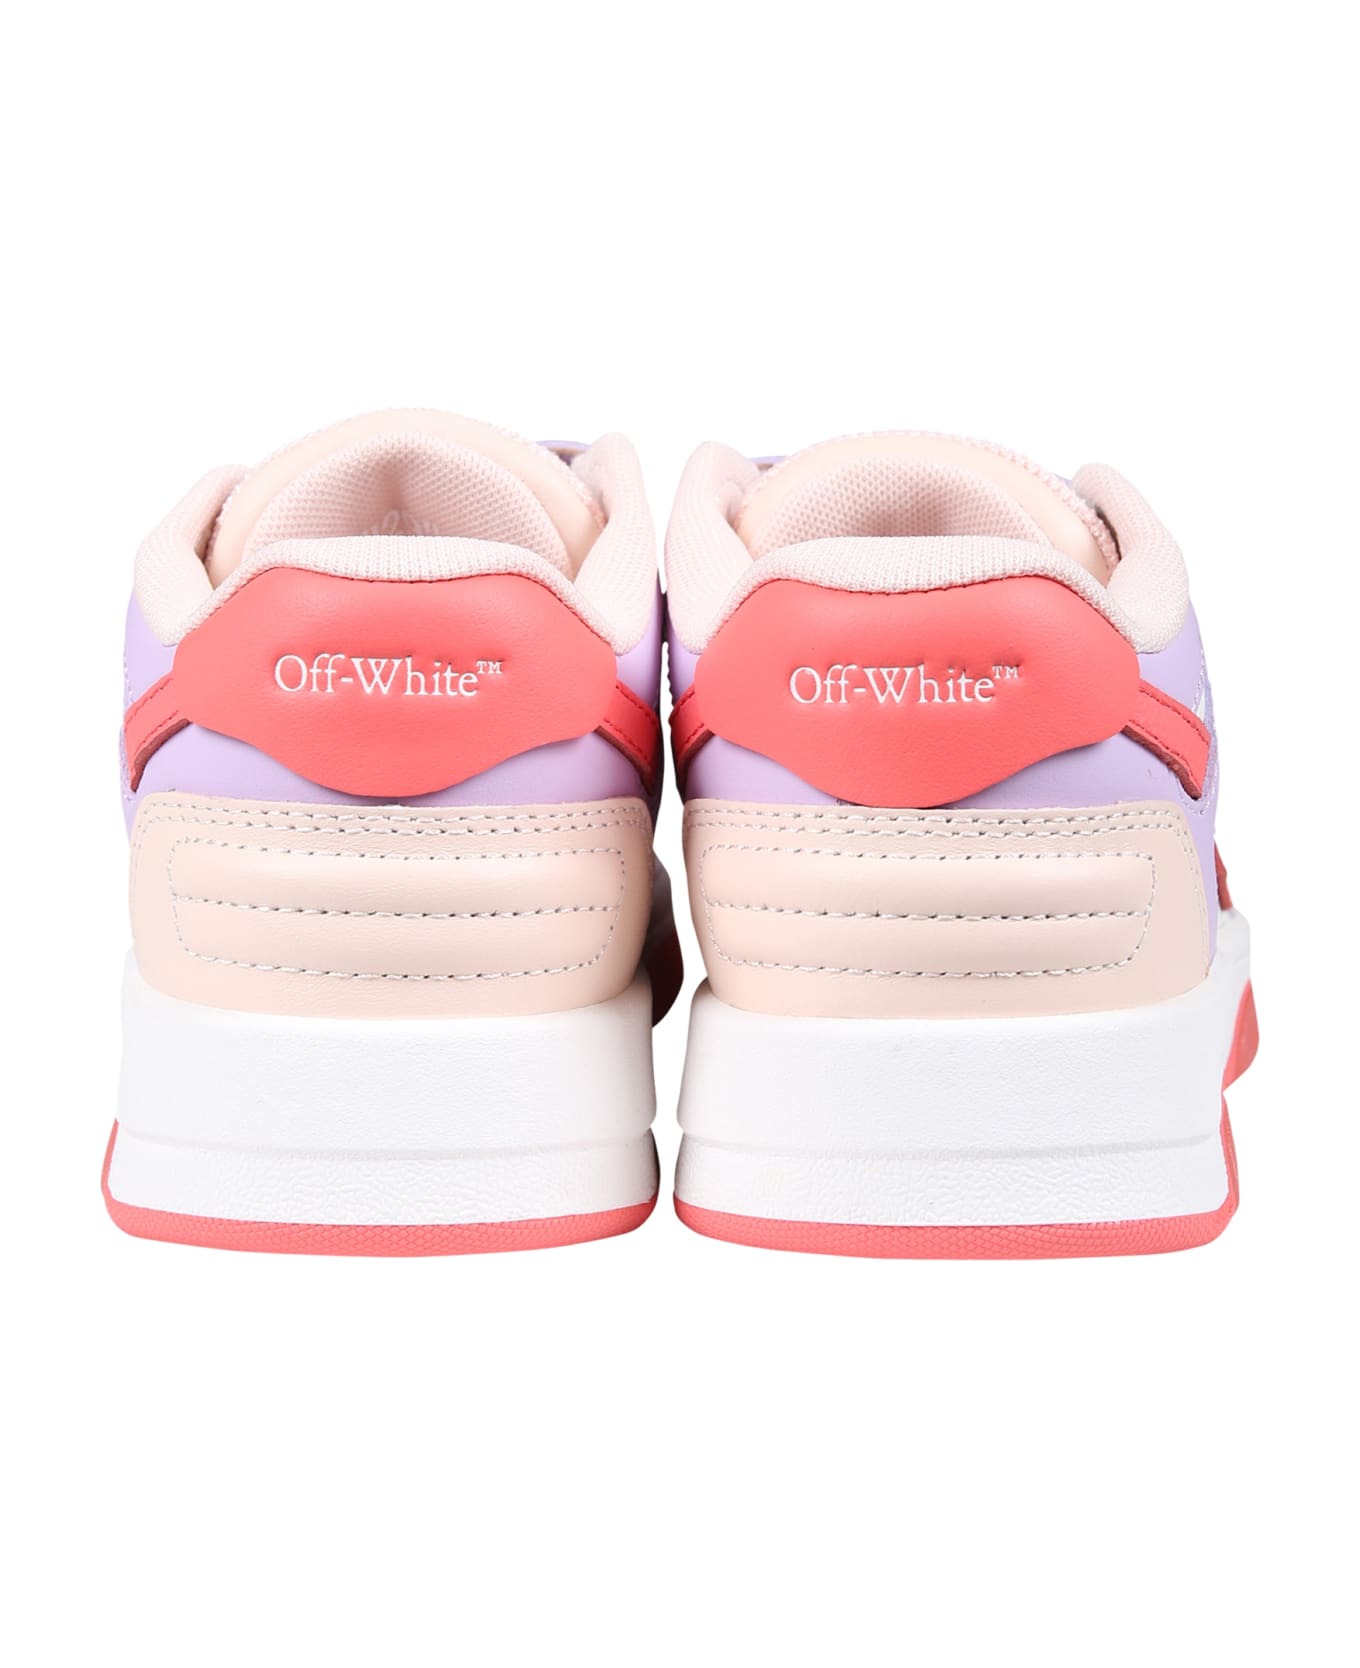 Off-White Pink Sneakers For Girl With Arrows - Multicolor